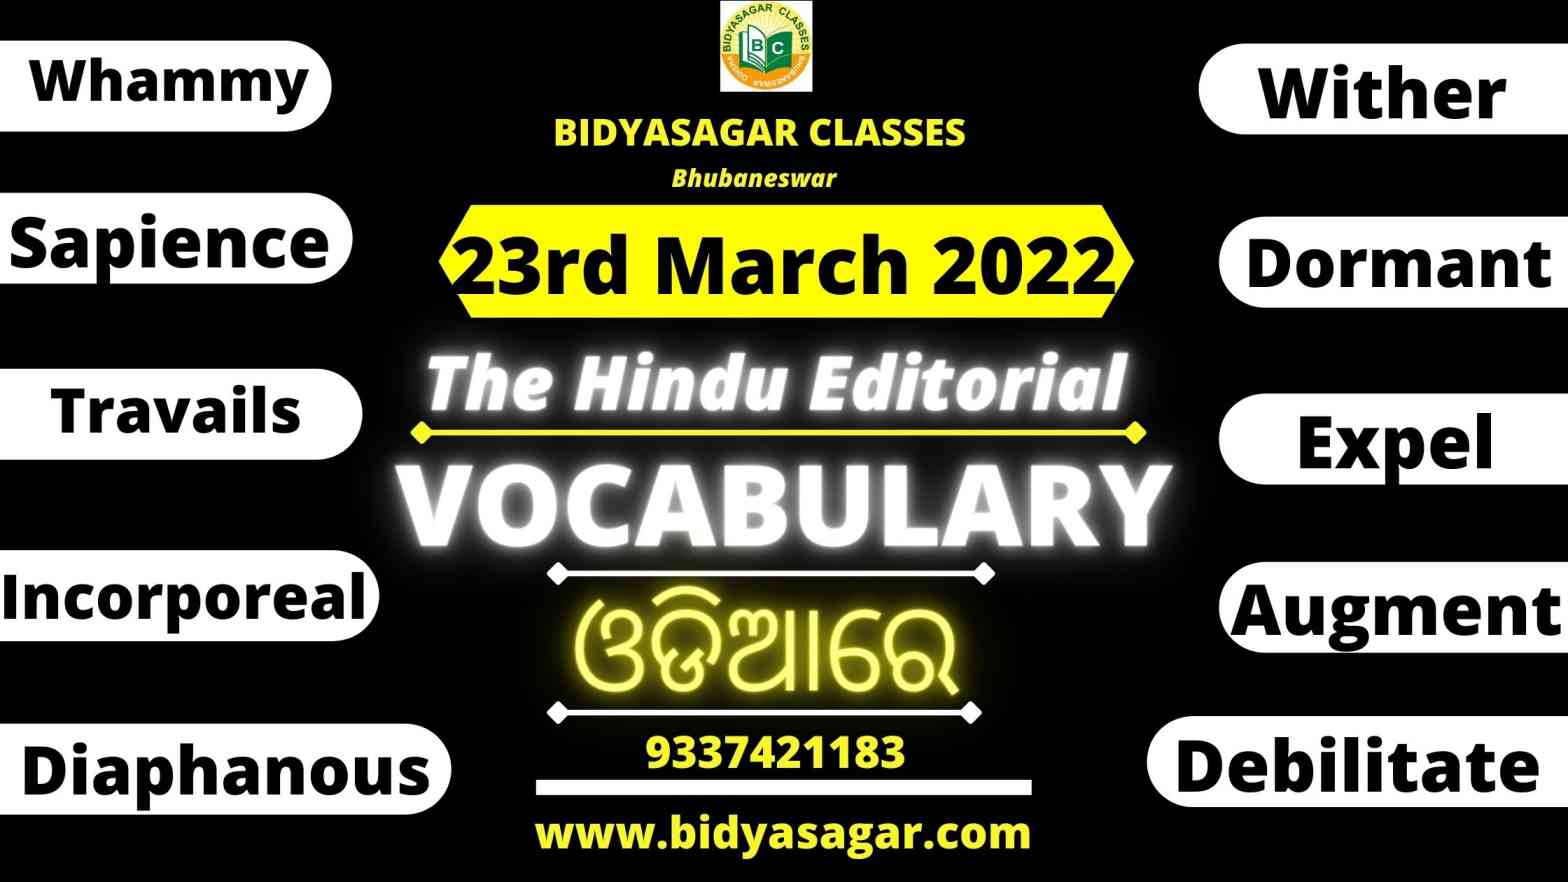 The Hindu Editorial Vocabulary of 23rd March 2022